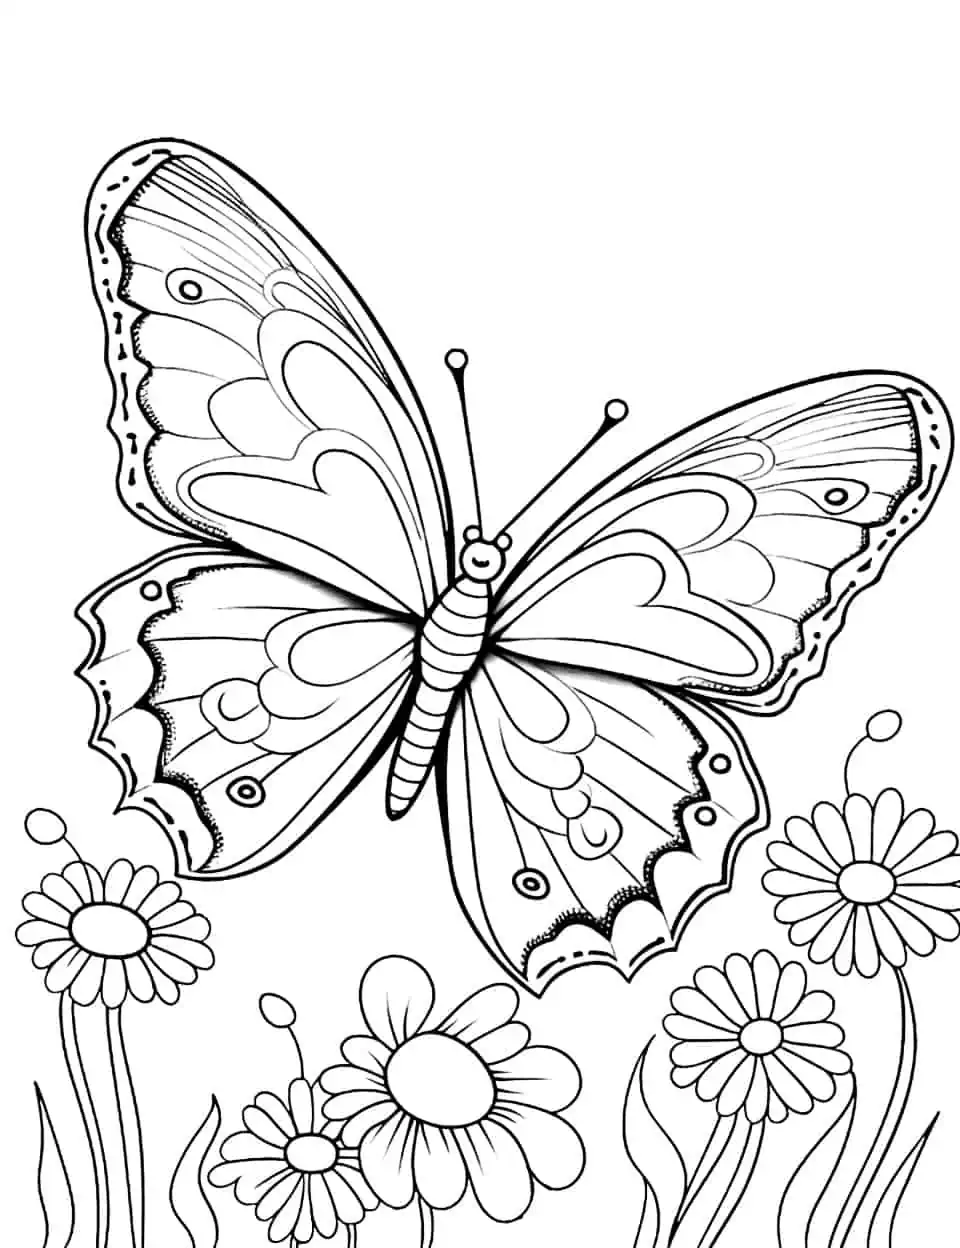 Delicate Dance Butterfly Coloring Page - A coloring page capturing the elegant flight of butterflies in a field of blooming flowers.